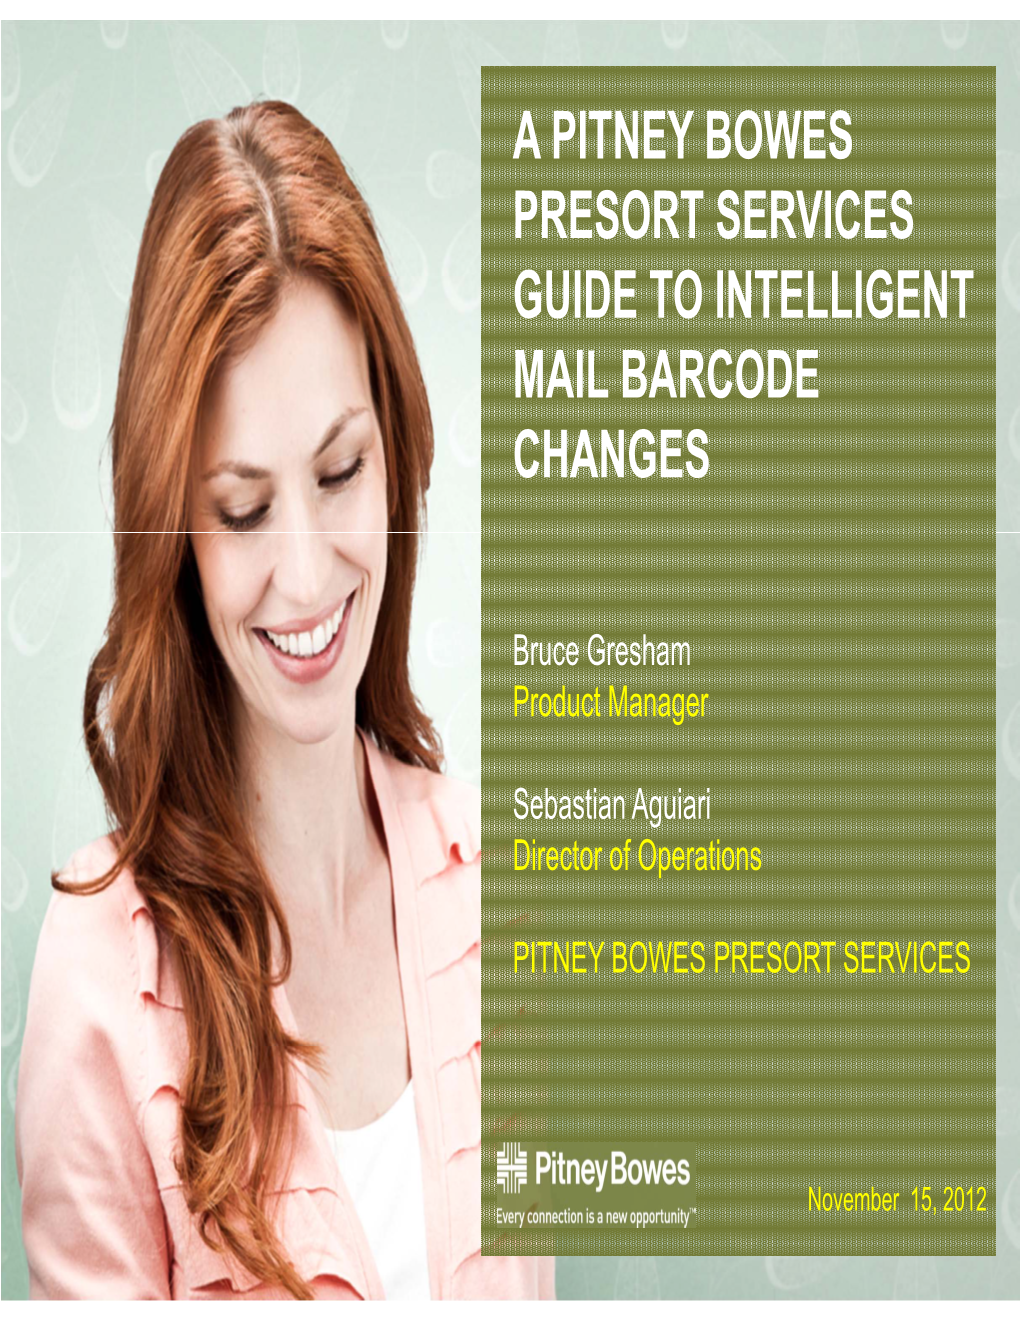 A Pitney Bowes Presort Services Guide to Intelligent Mail Barcode Changes